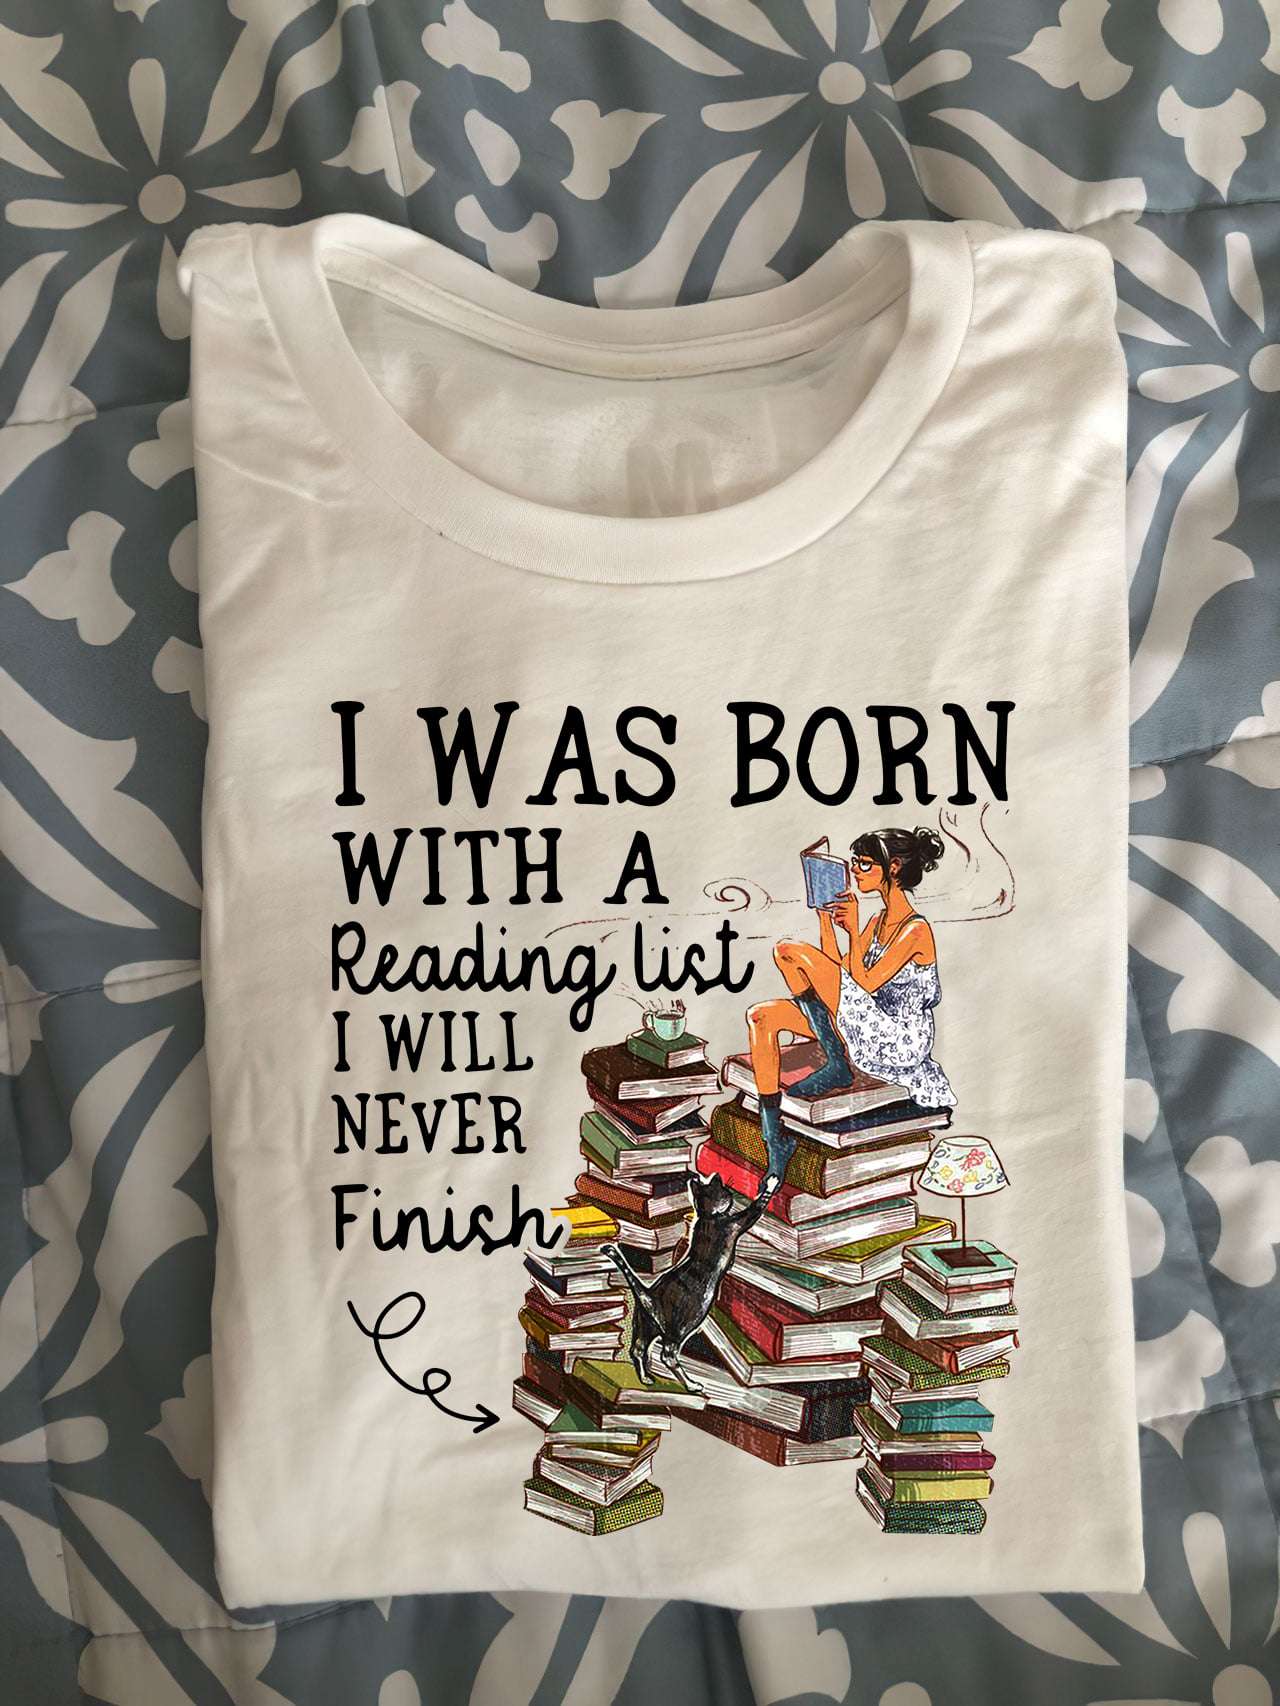 I was born with a reading list I will never finish - Girl reading books, book reading list